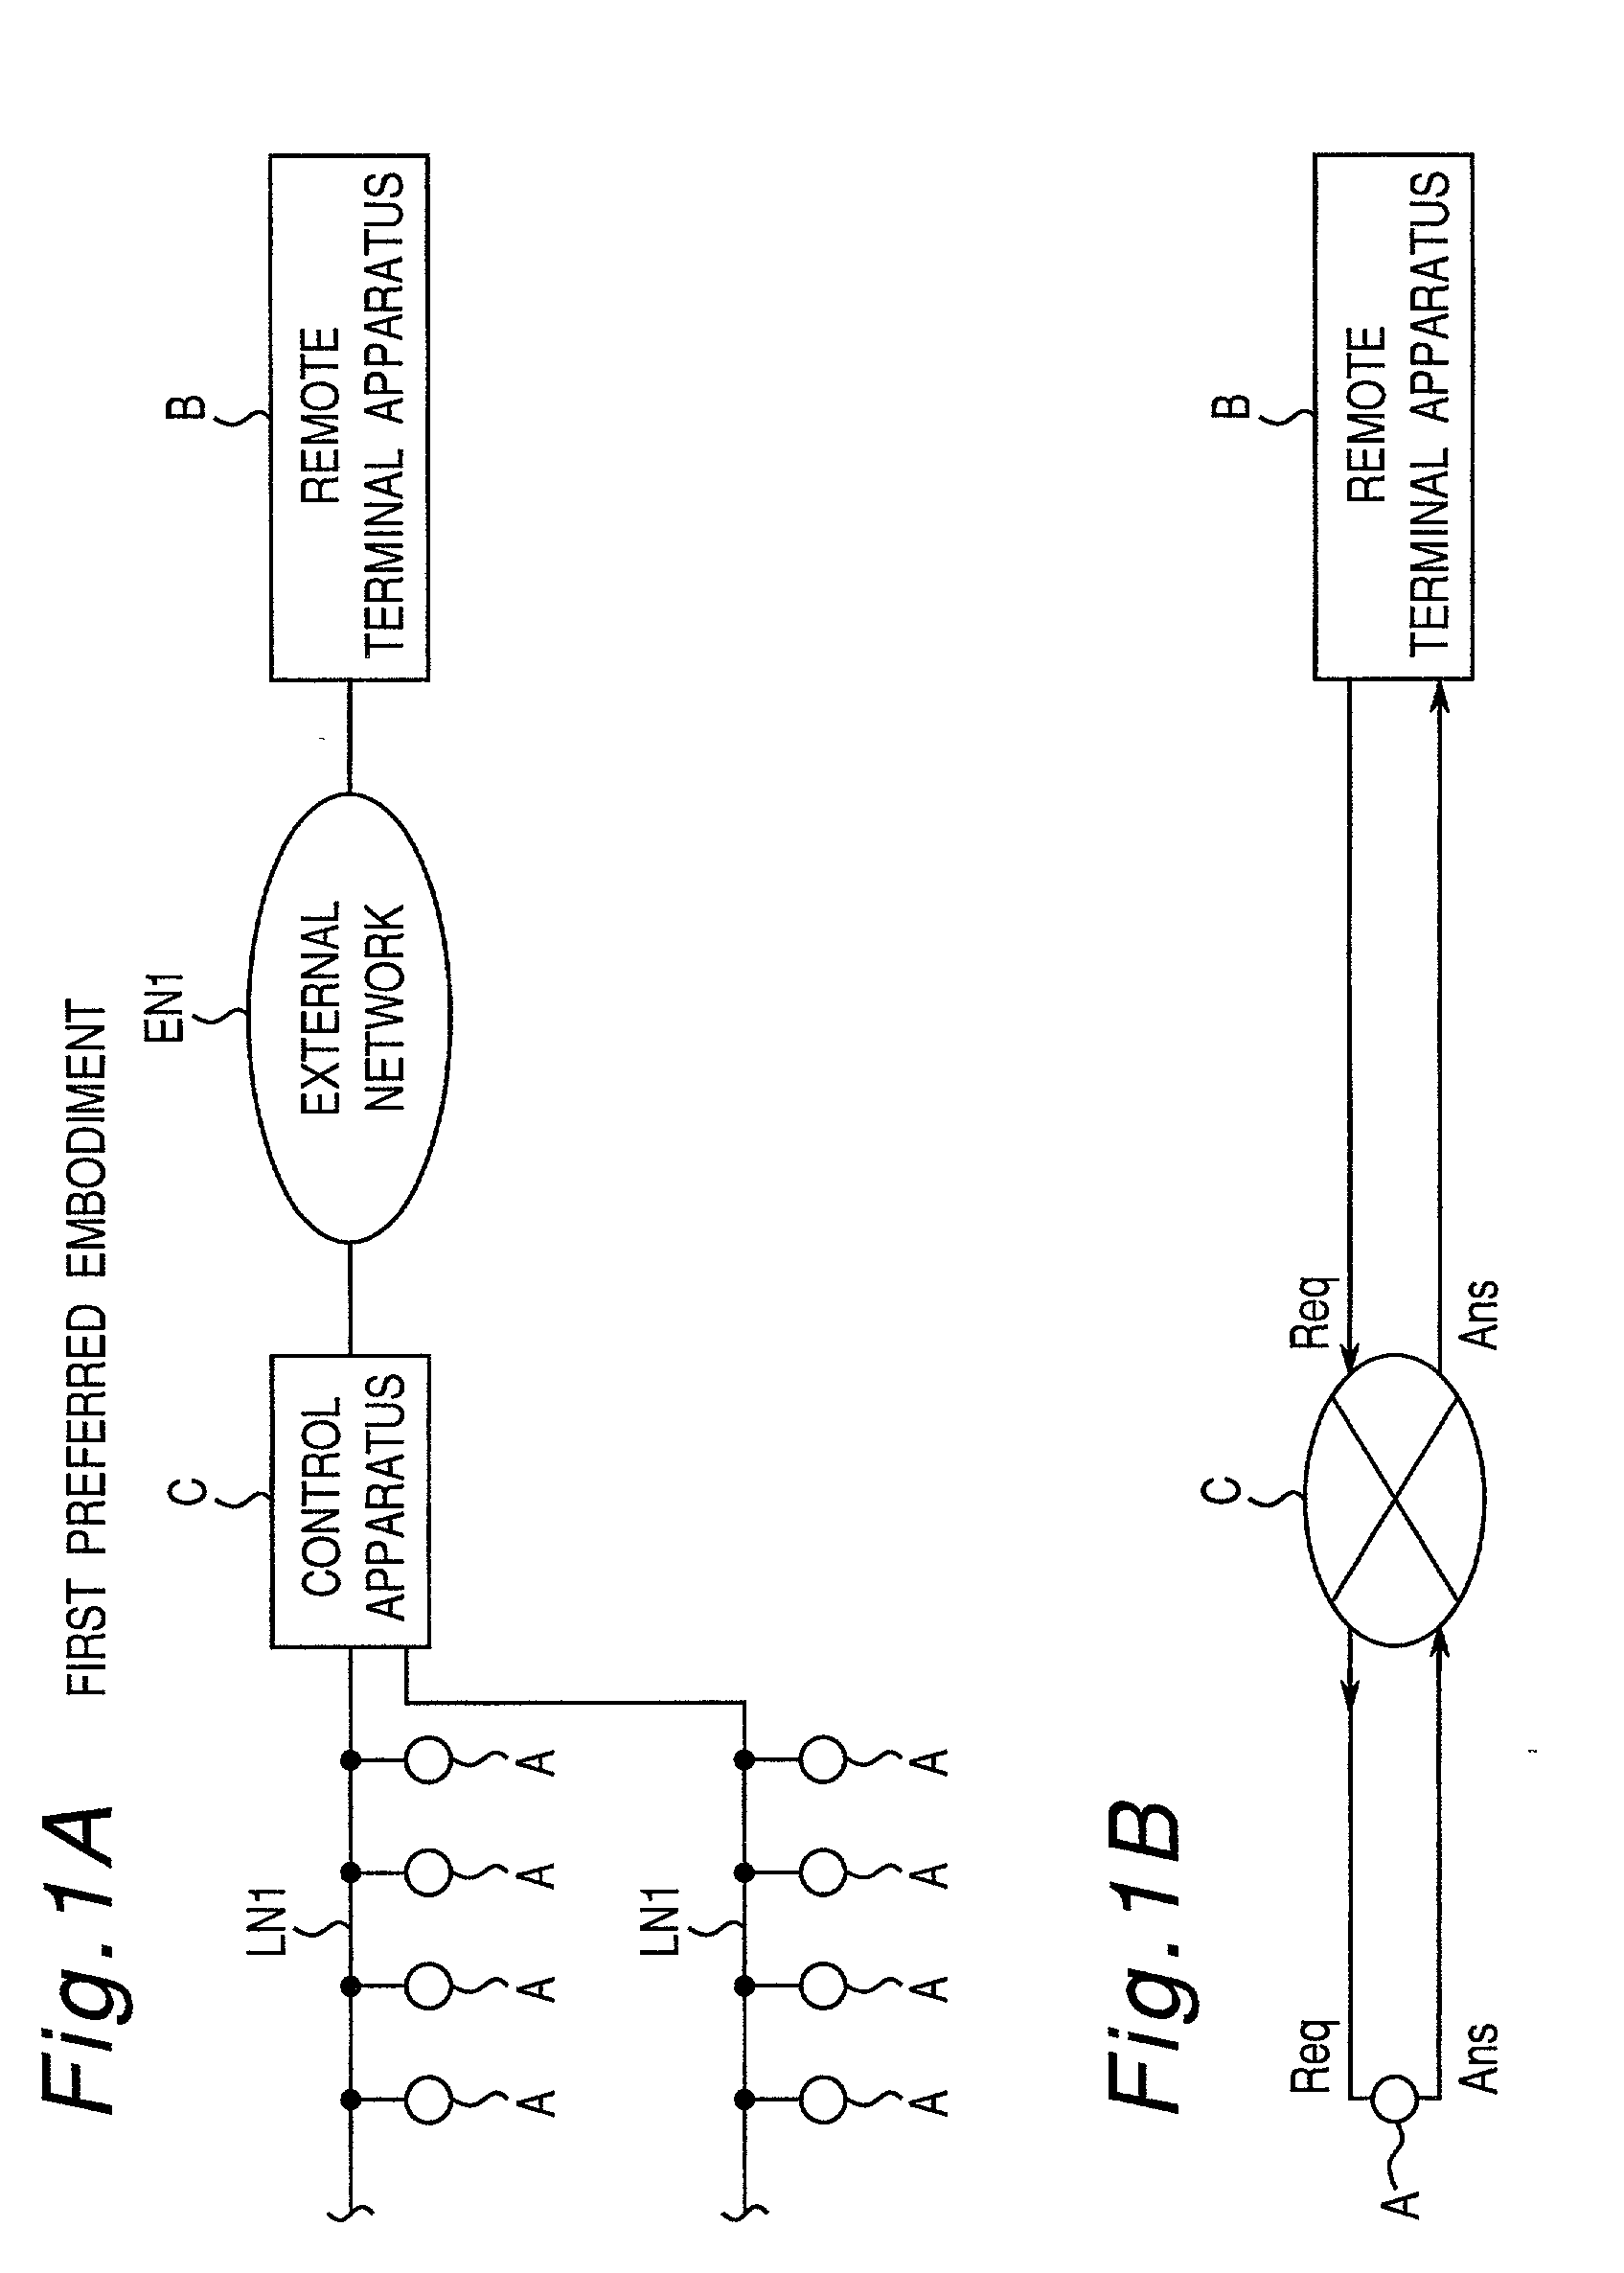 Communication system provided with control apparatus between local network and external network